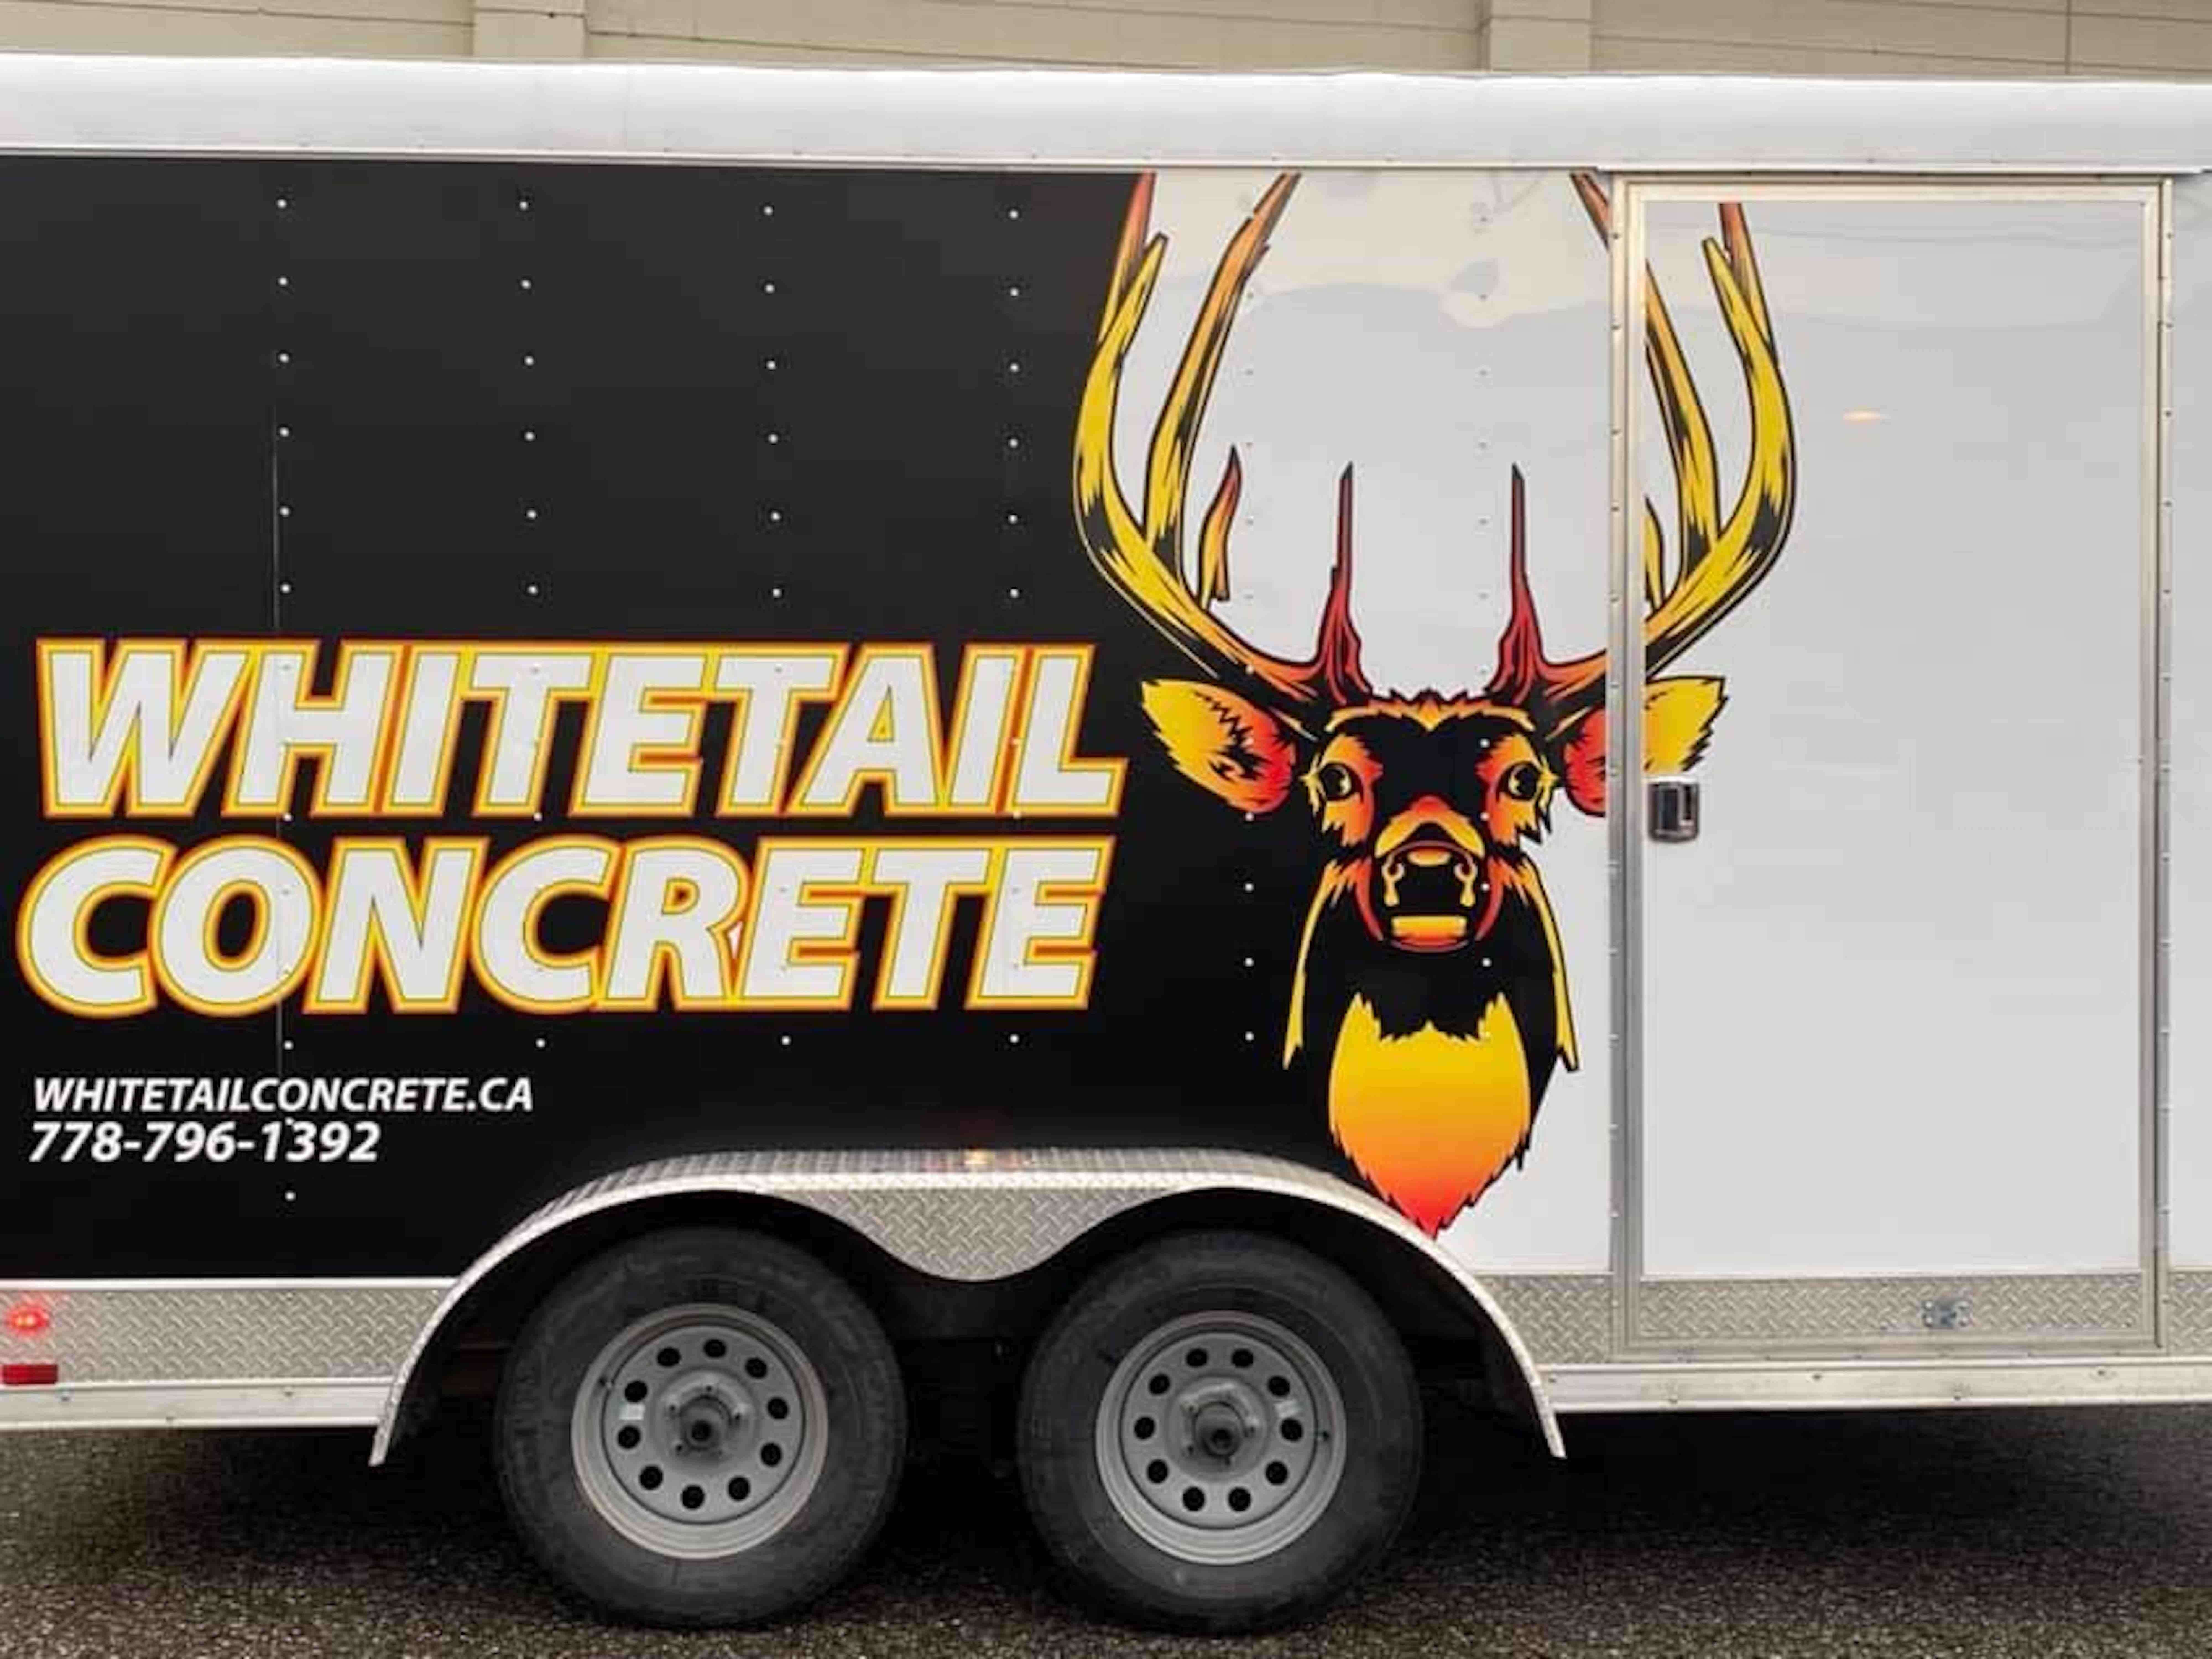 Whitetail concretes trailer with their logo on the side